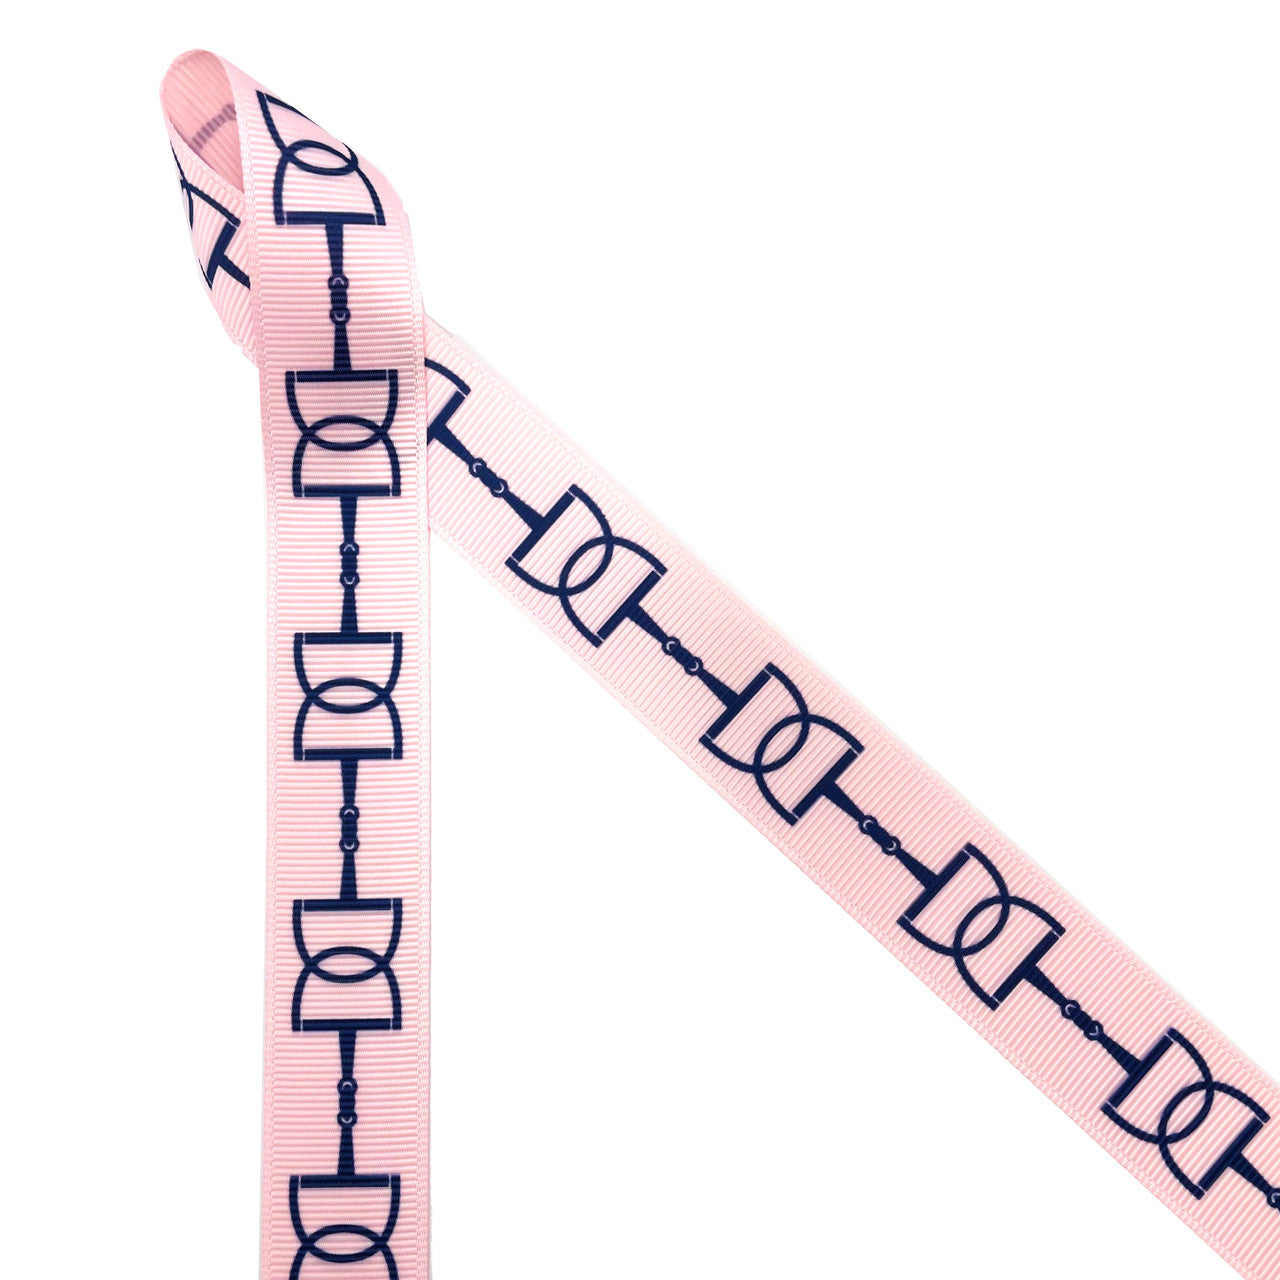 Snaffle bit ribbon with navy blue bits printed on 7/8" pink single grosgrain